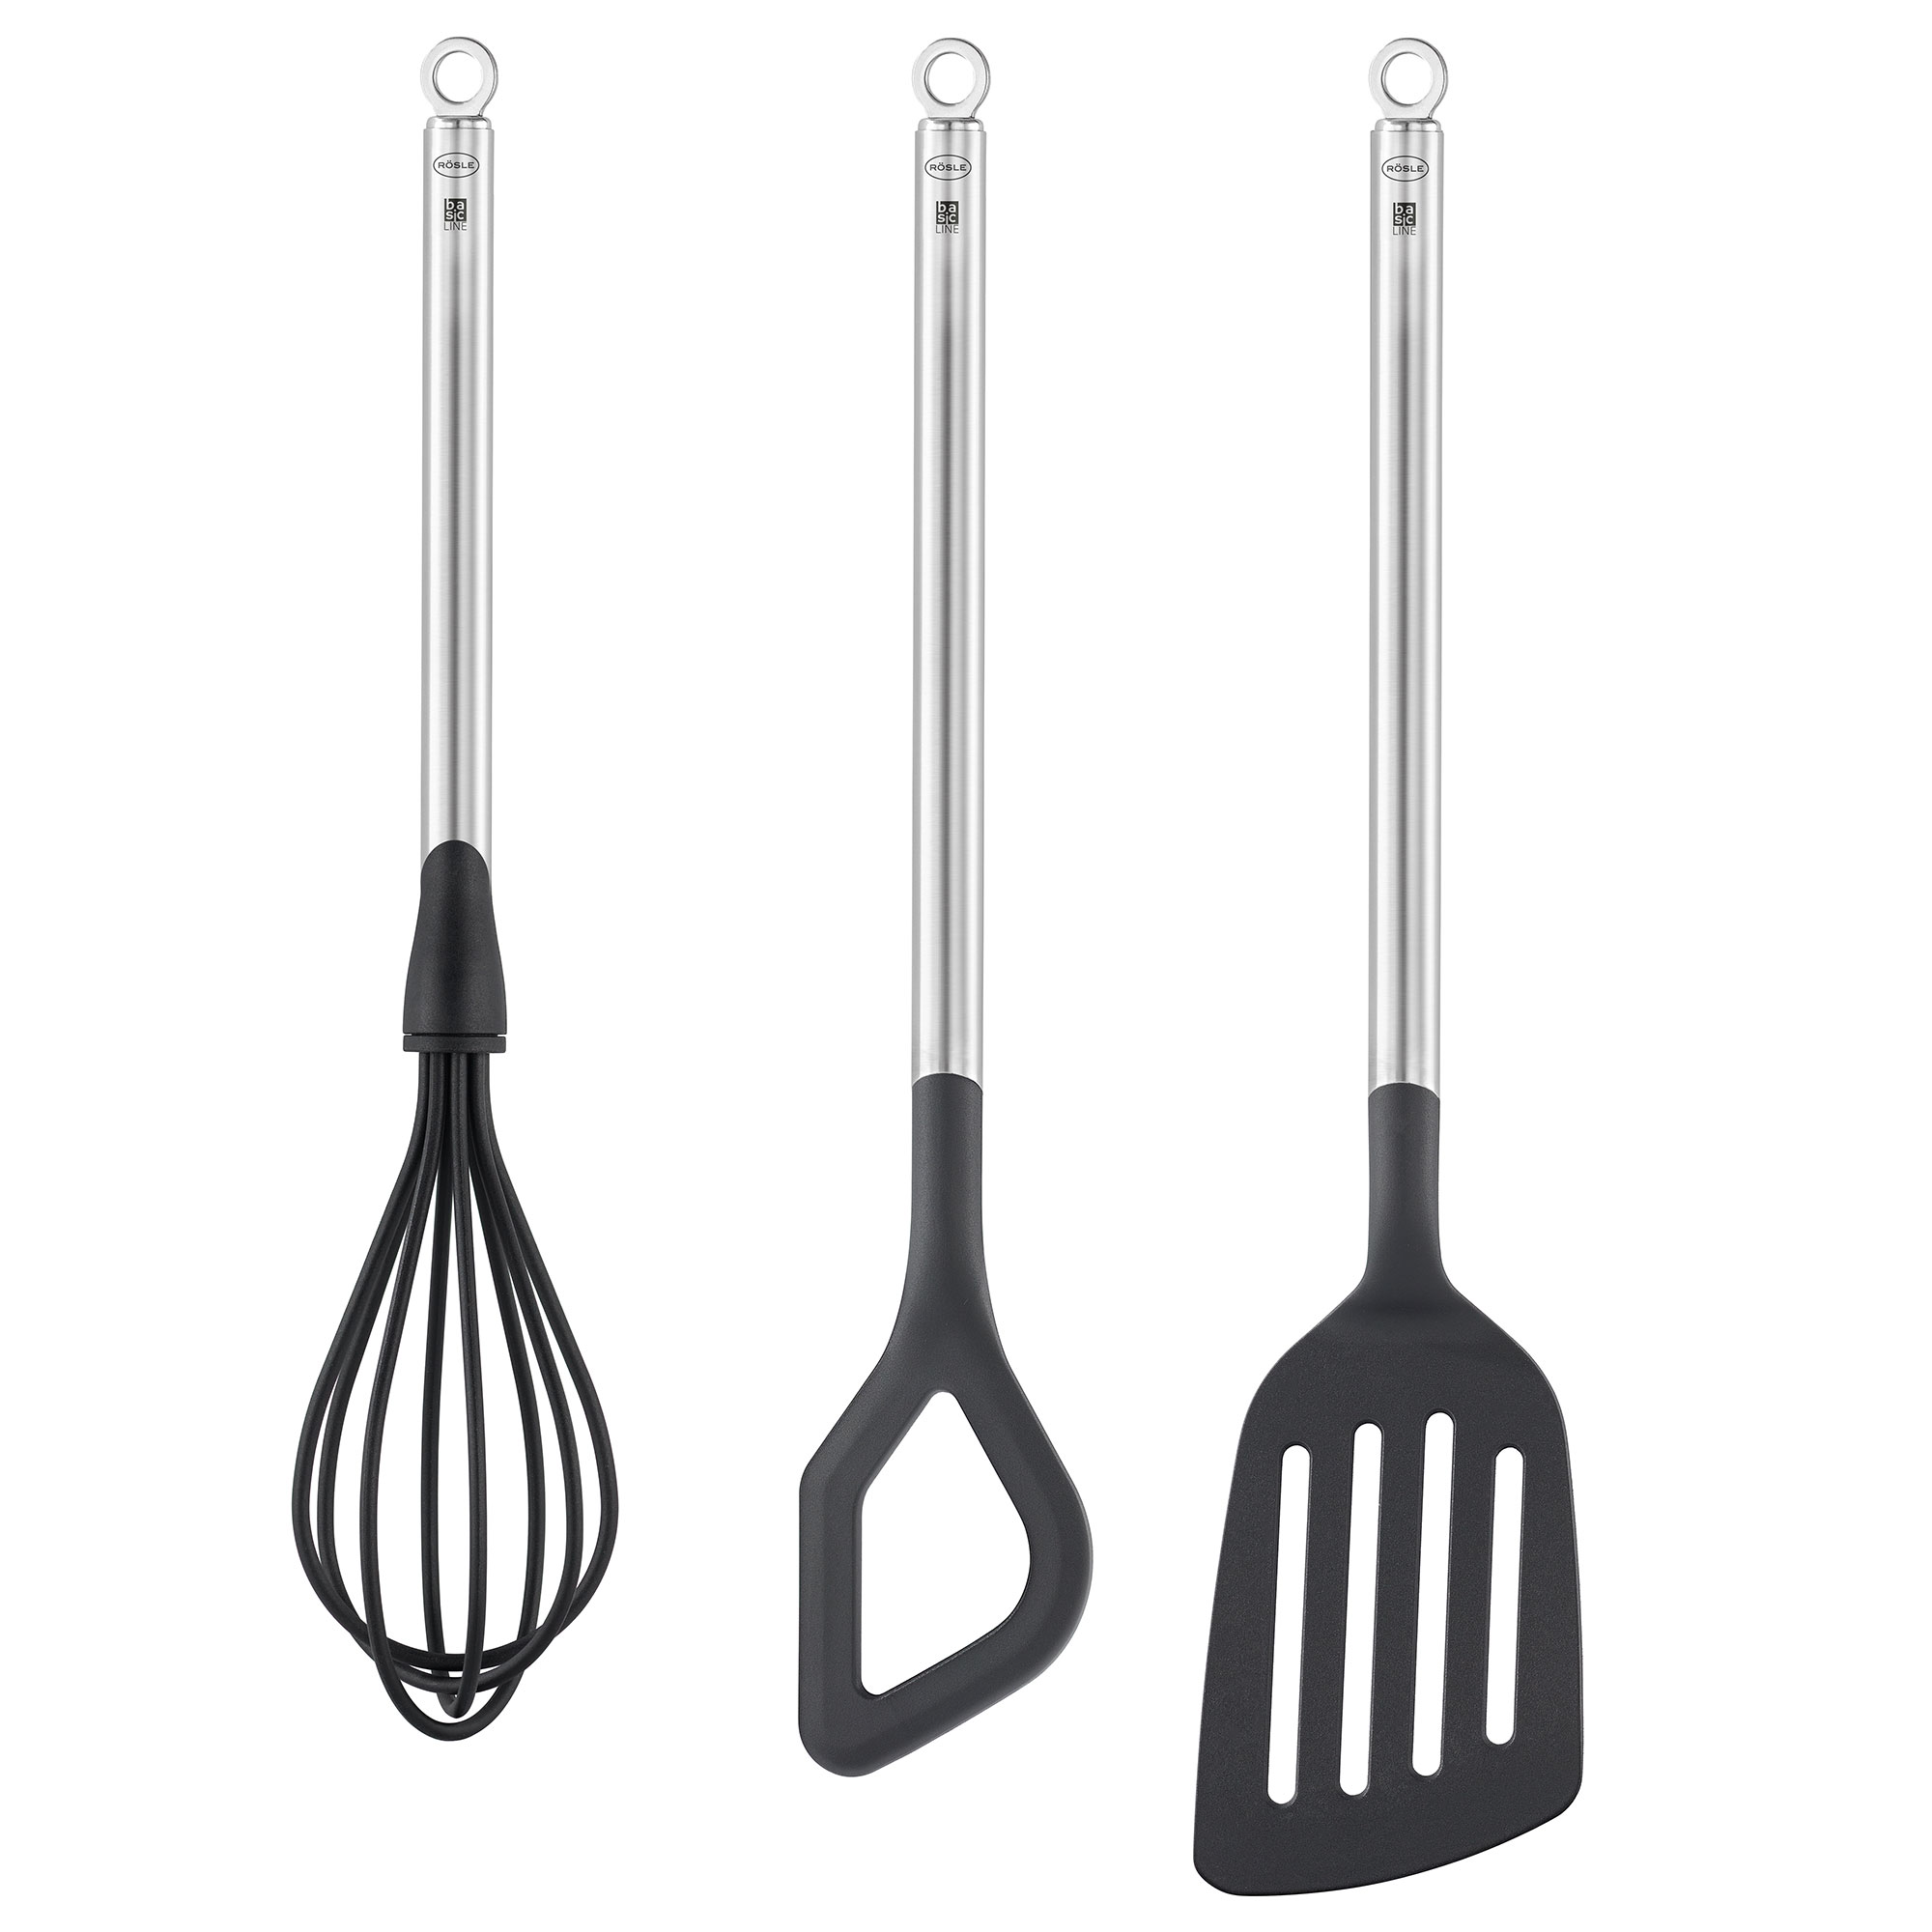  Rosle Stainless Steel Silicone Spiral Whisk, 22 cm